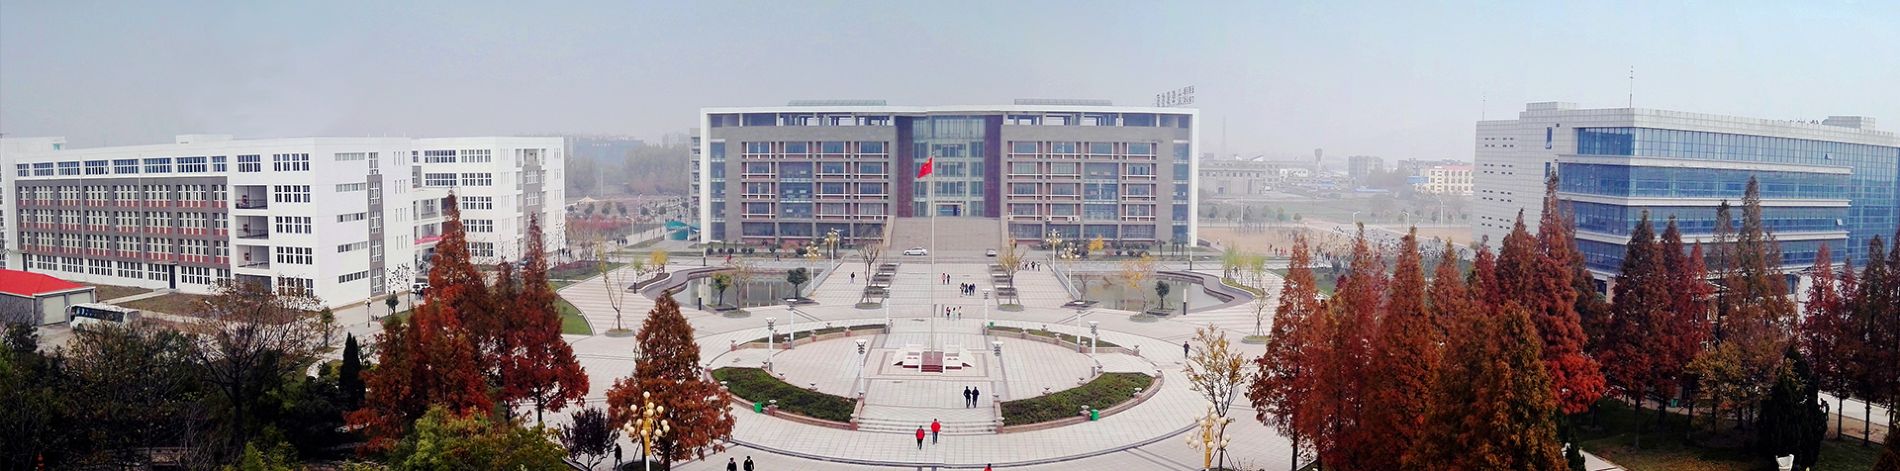 XUZHOU VOCATIONAL COLLEGE OF INDUSTRIAL TECHNOLOGY